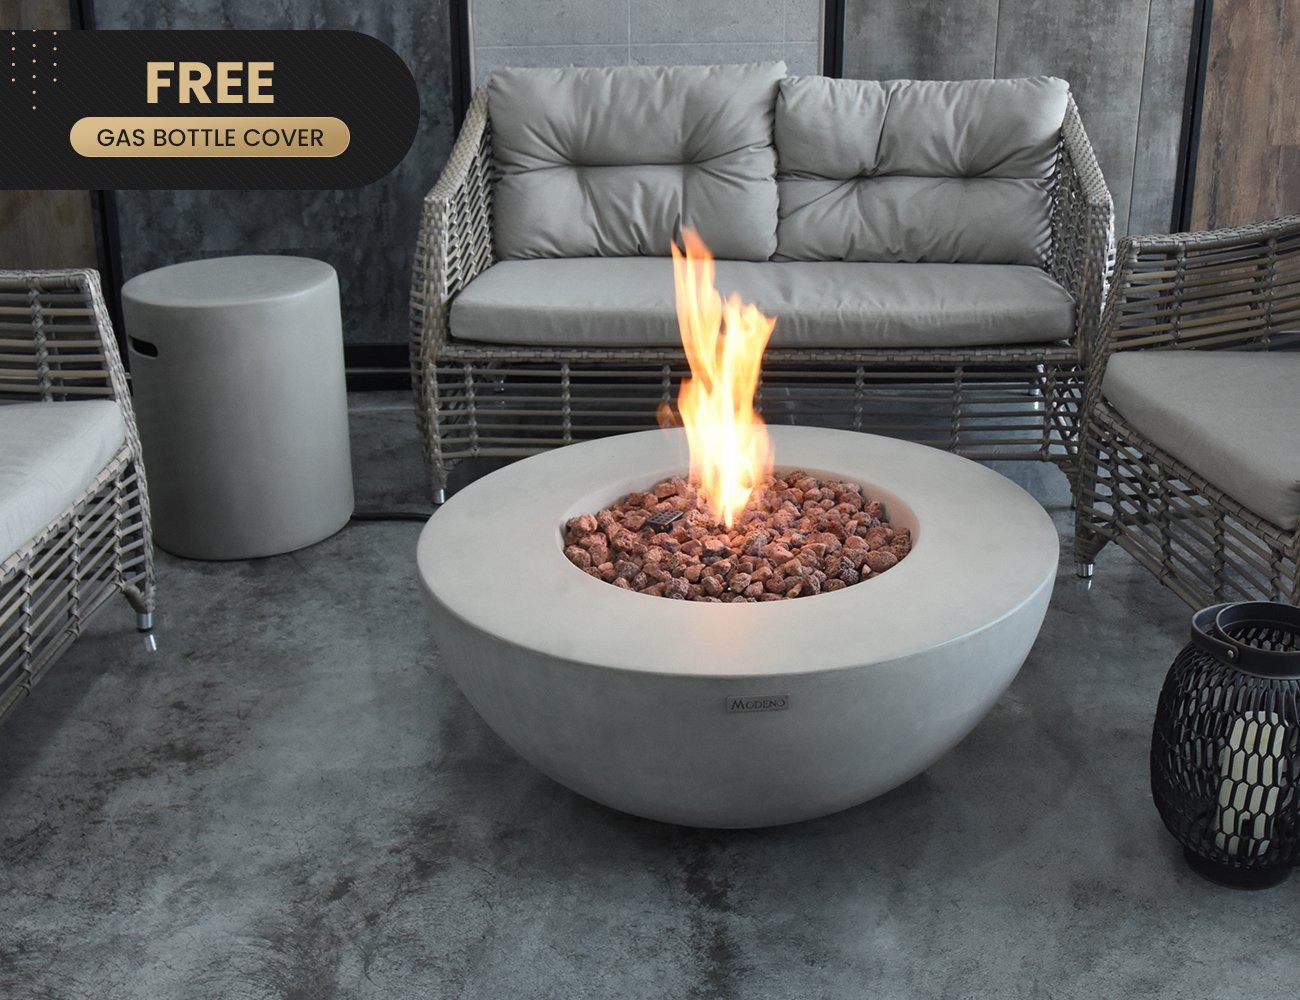 Roca Gas Fire Pit Table + Round Gas Bottle Cover